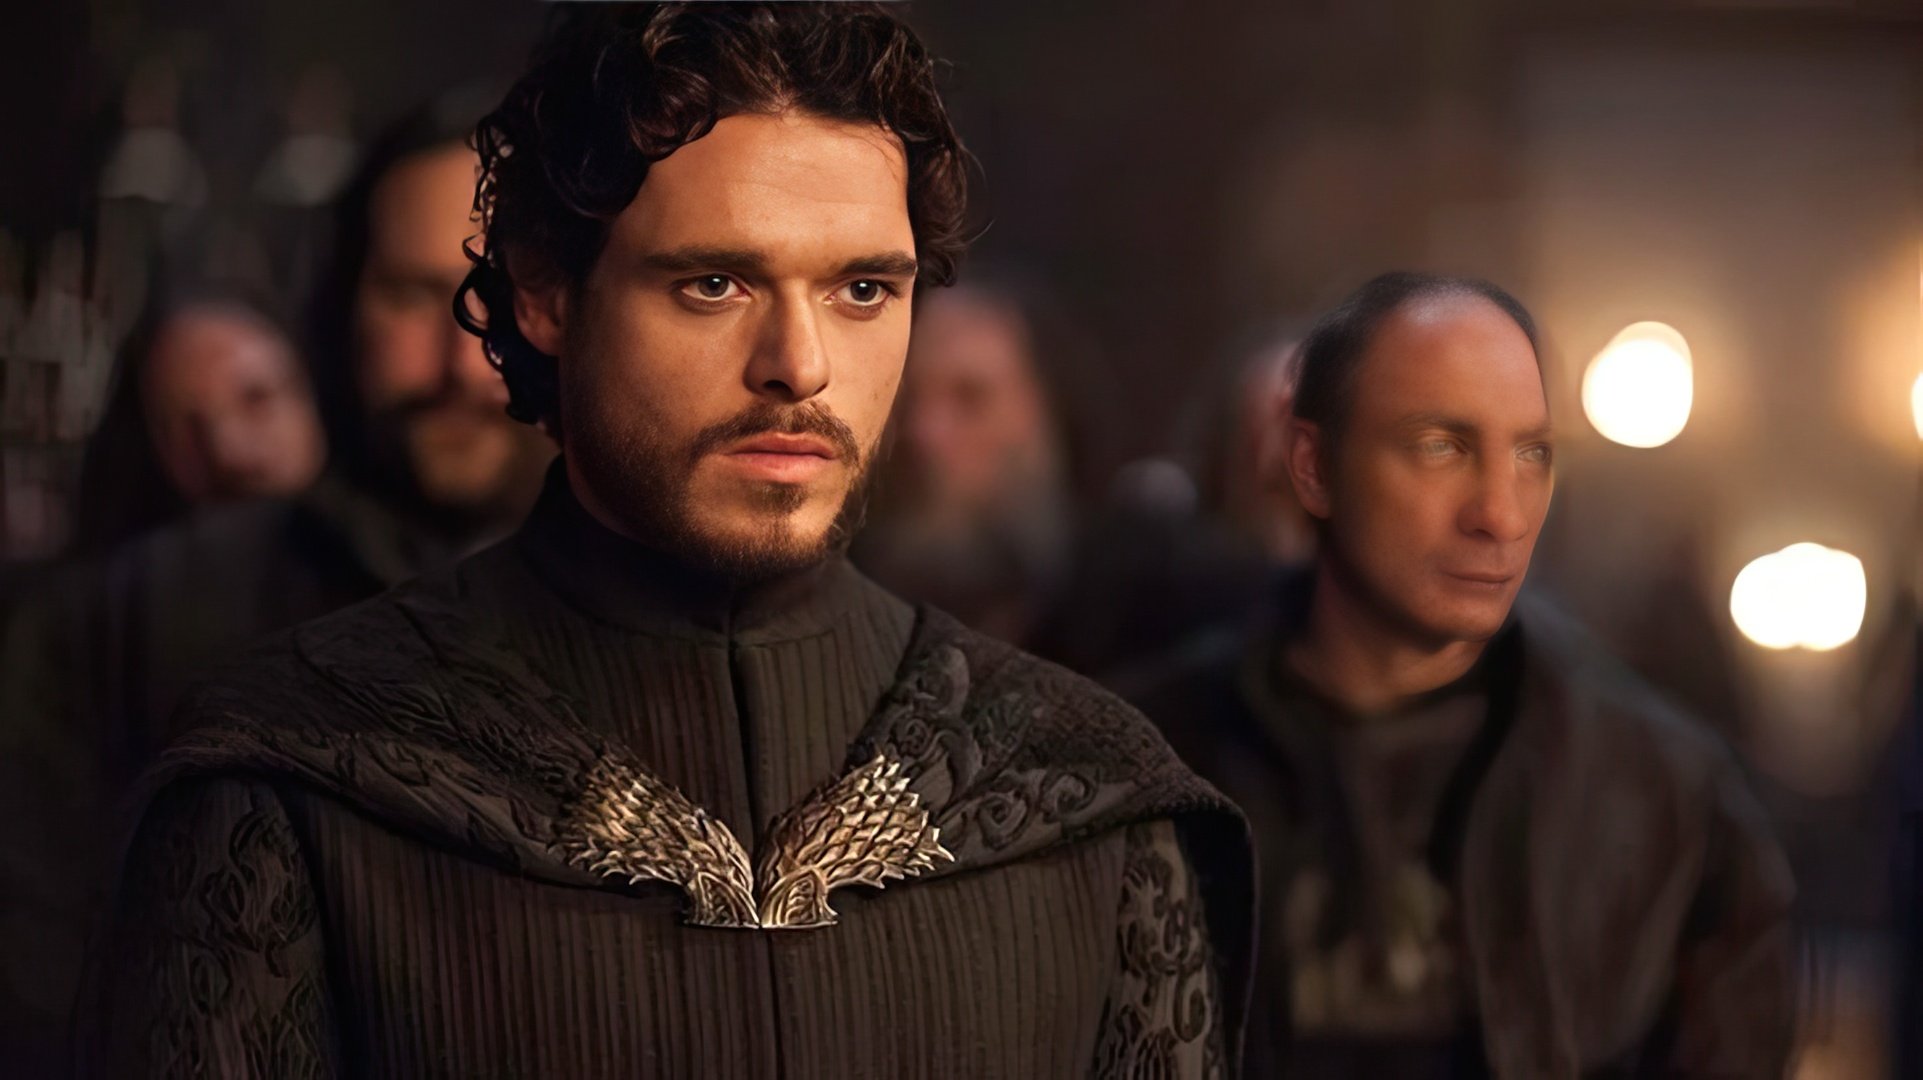 As Robb Stark in the series 'Game of Thrones'